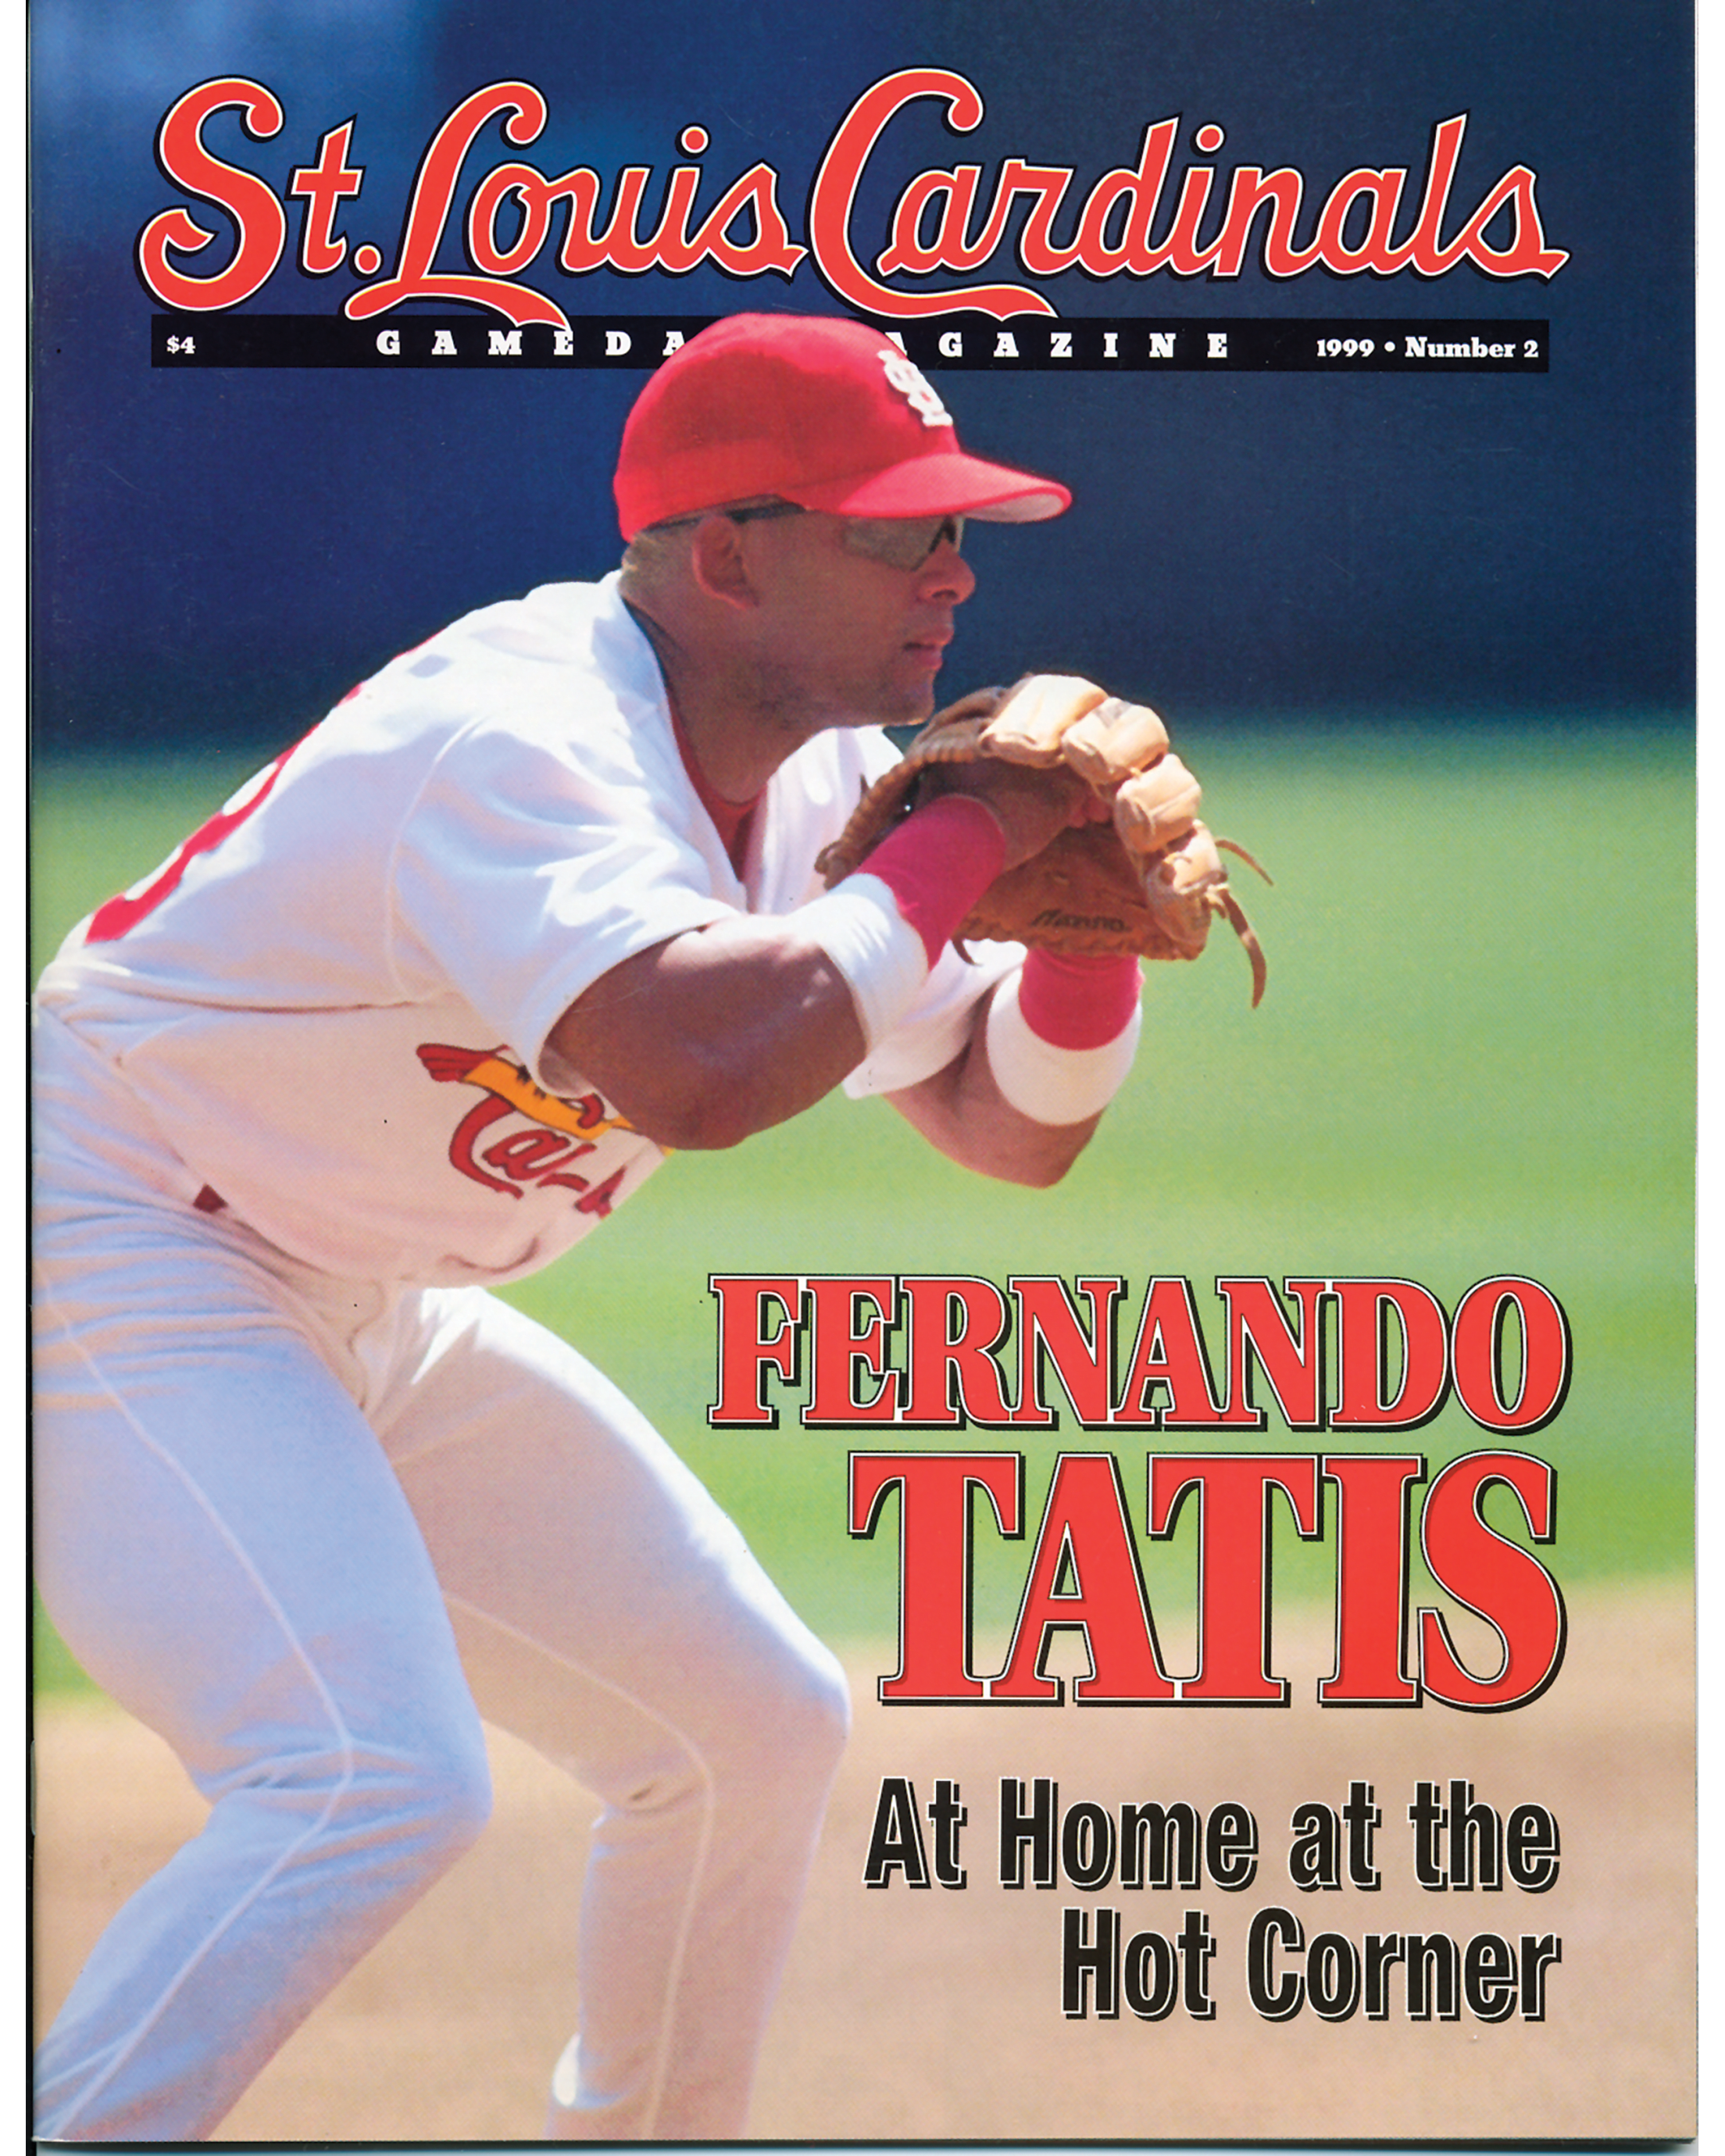 1999 Issues | St. Louis Cardinals - MLB.com